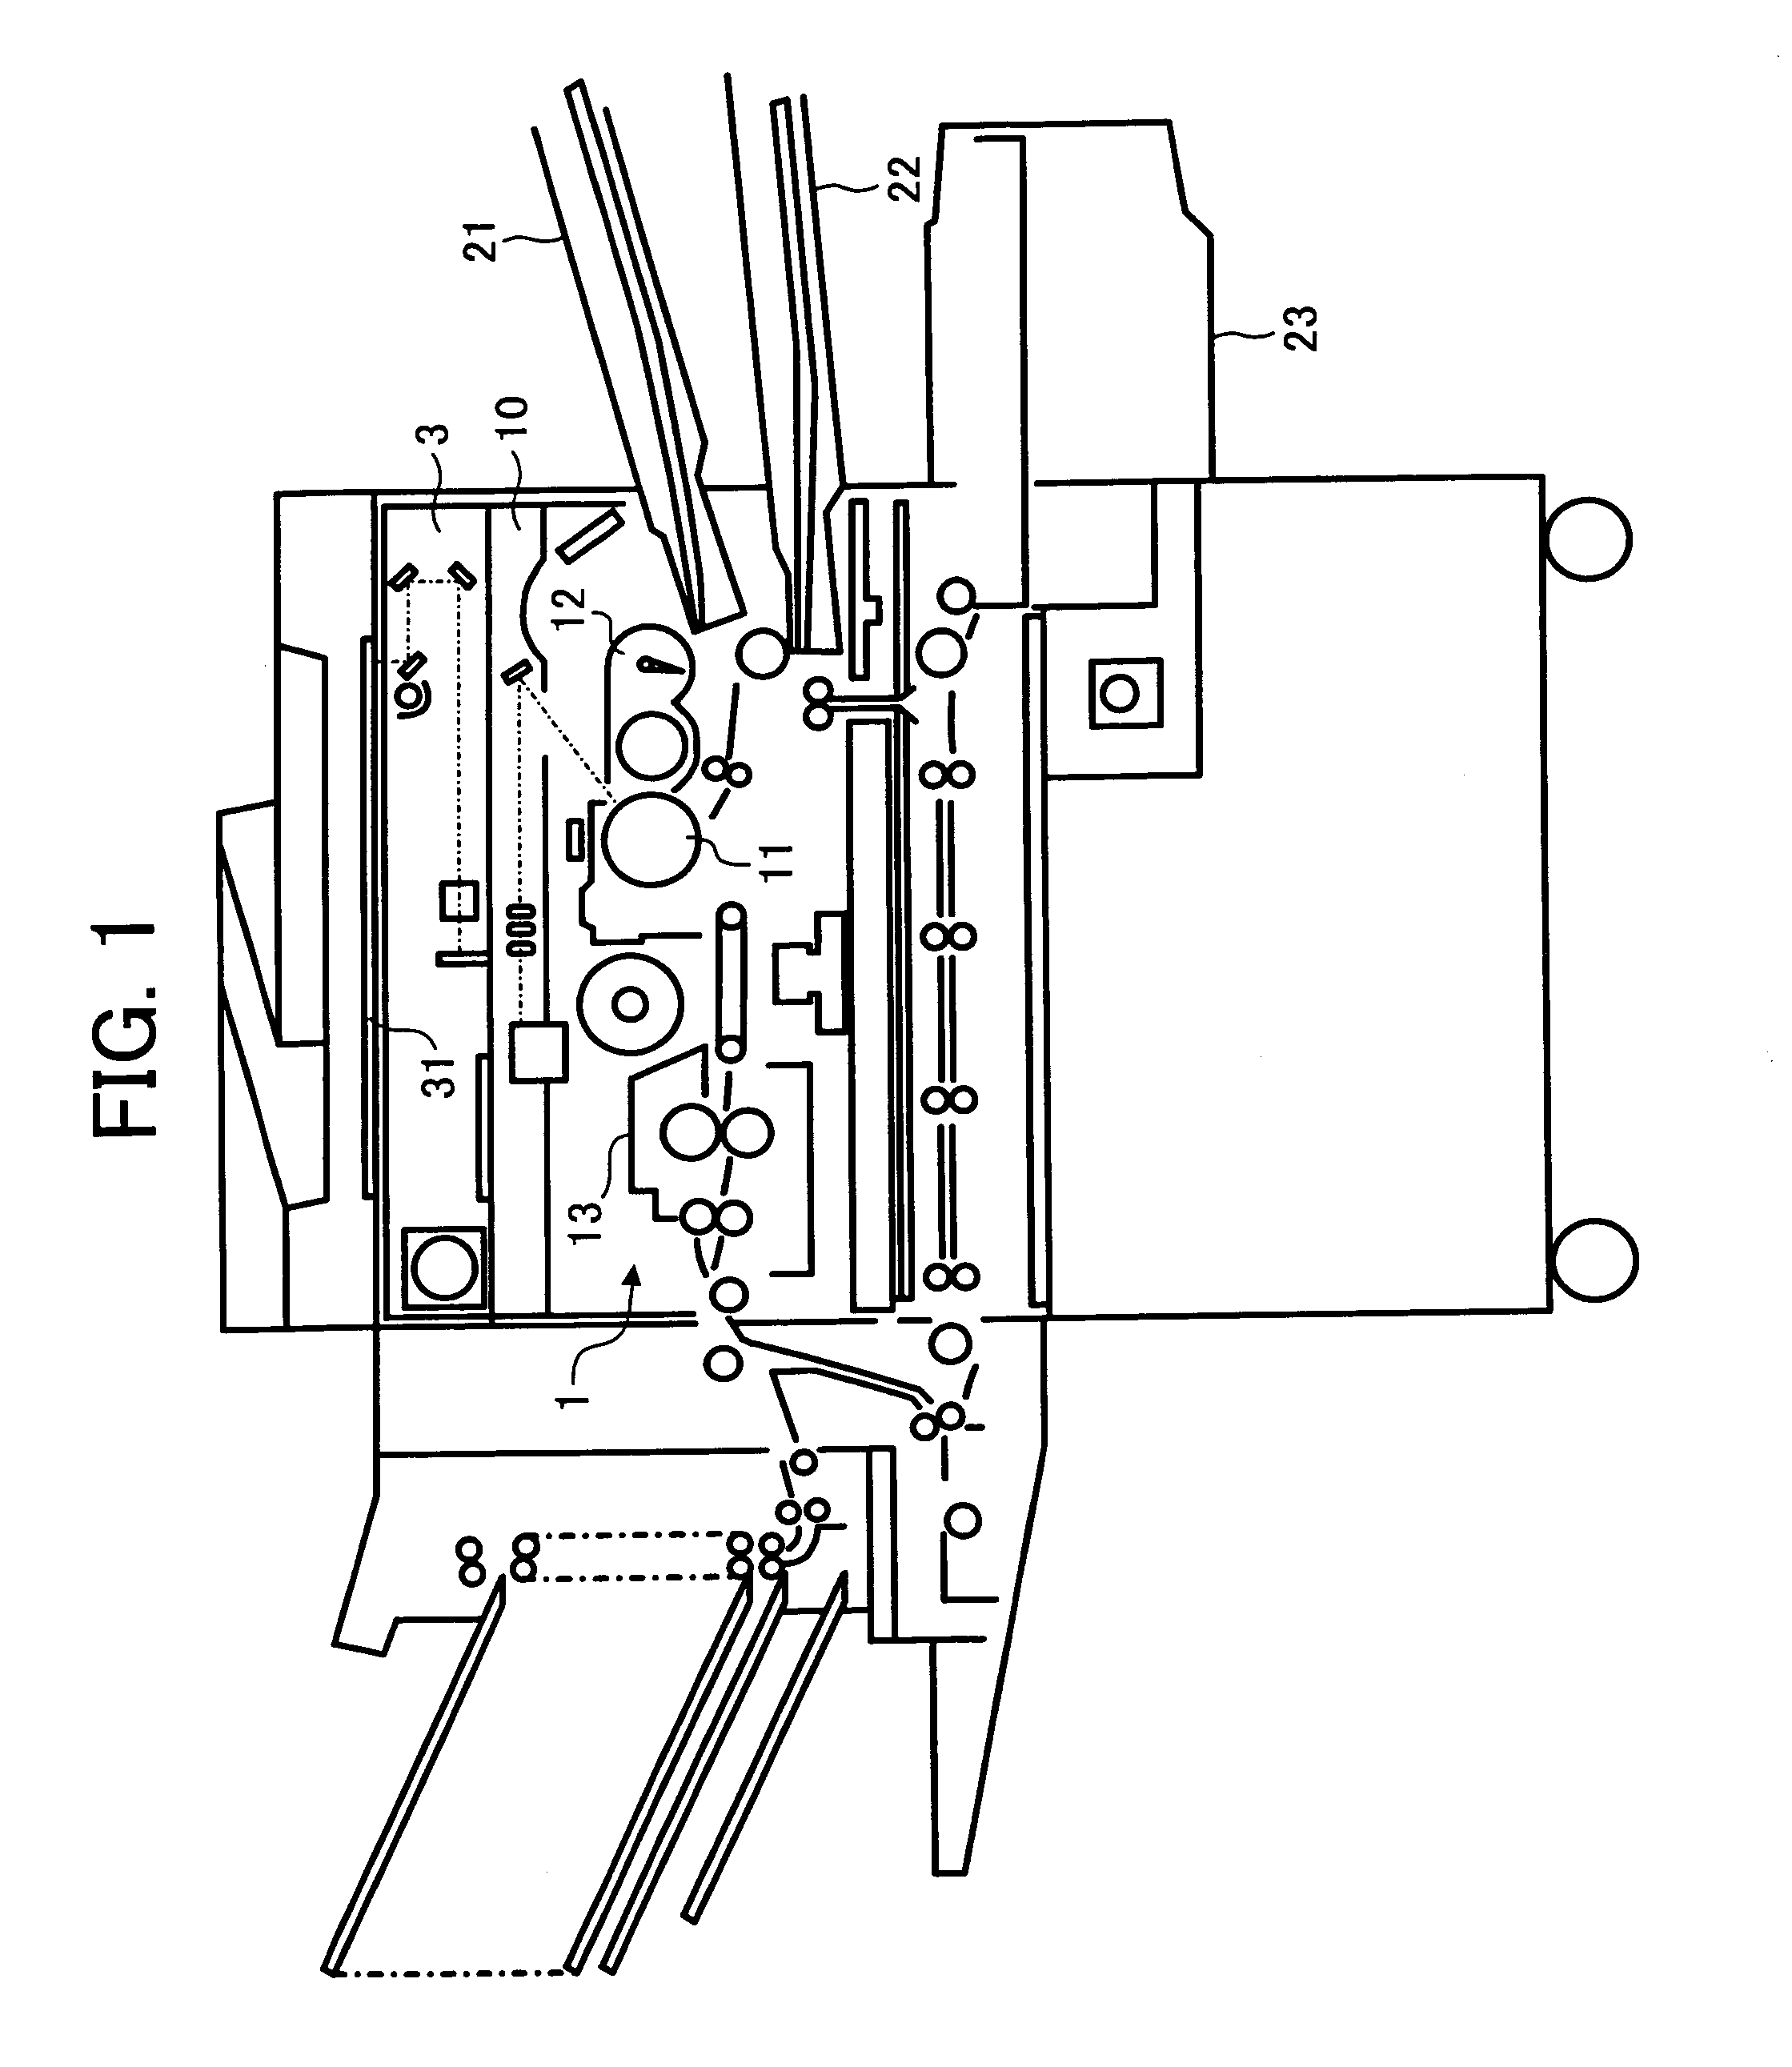 Method and apparatus for image forming capable of reducing mechanical stresses to developers during transportation for development